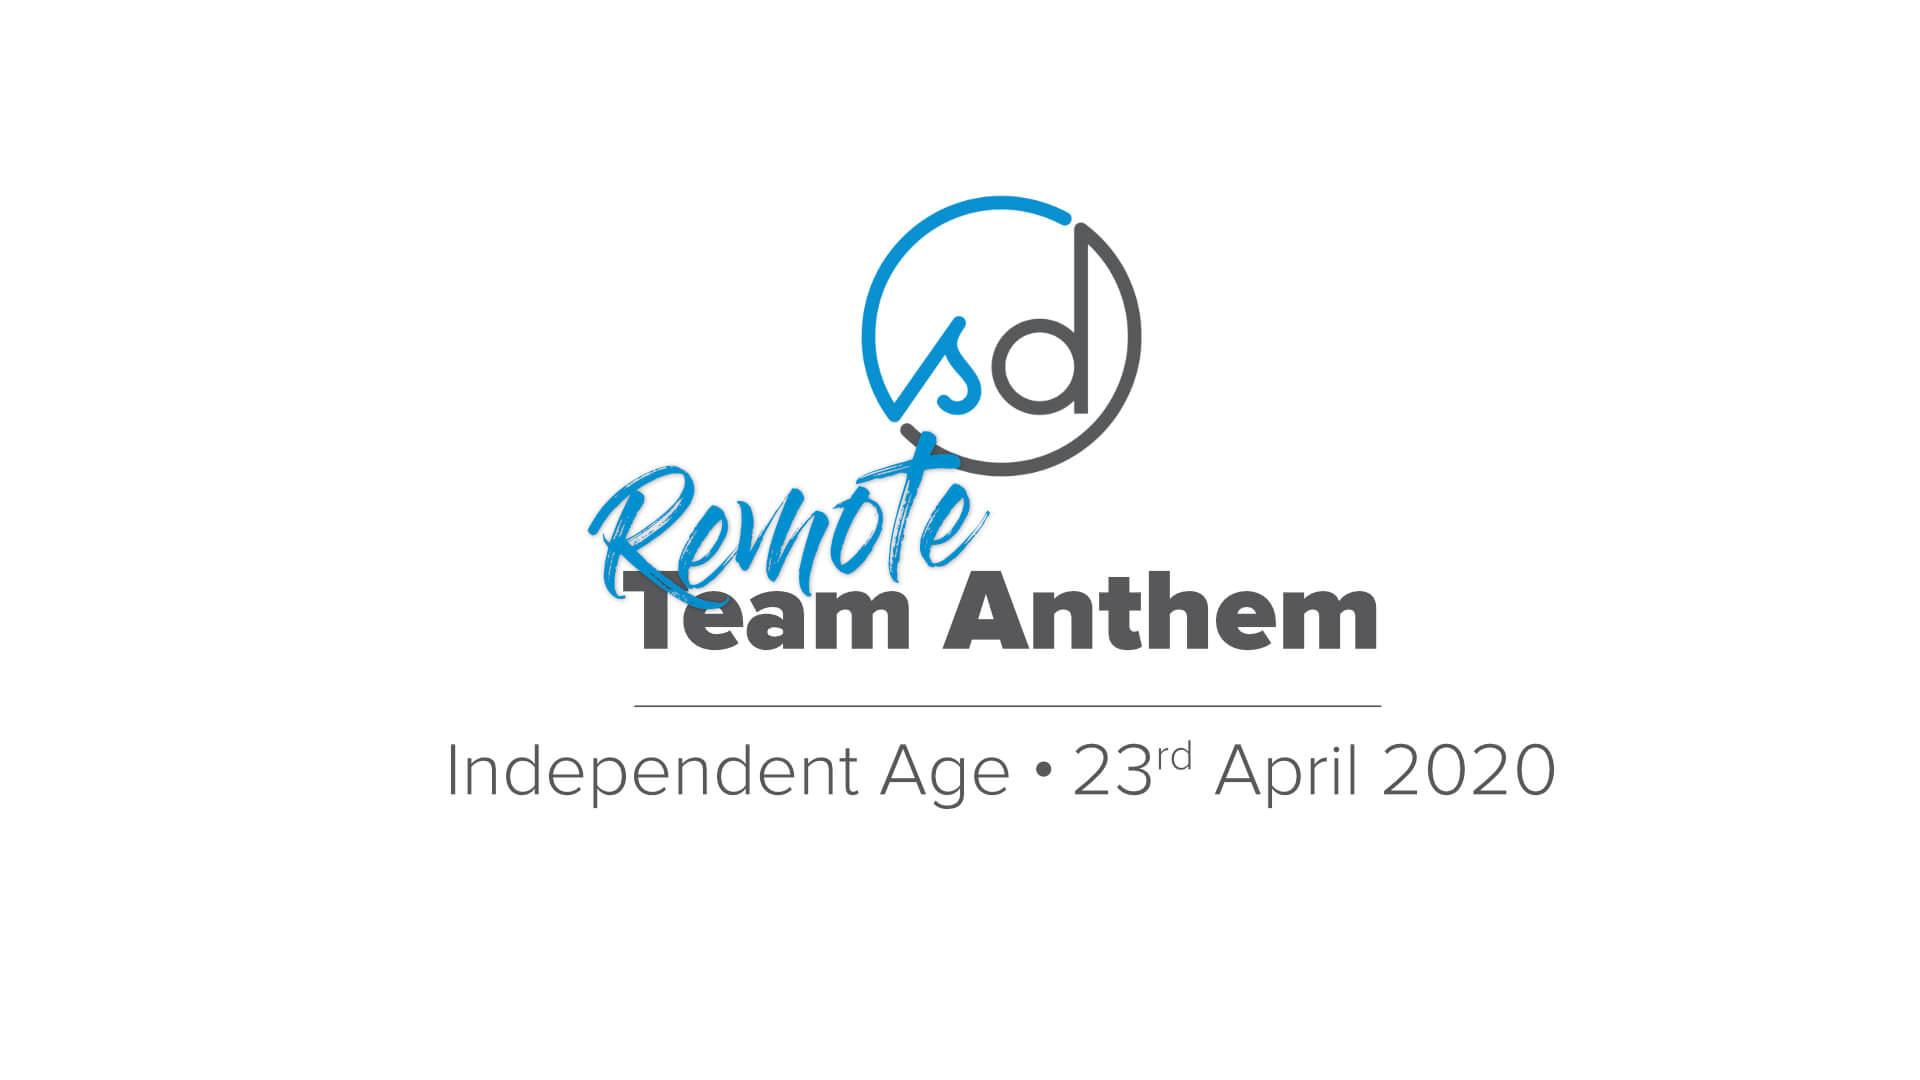 Independent Age: Remote Team Anthem with SongDivision